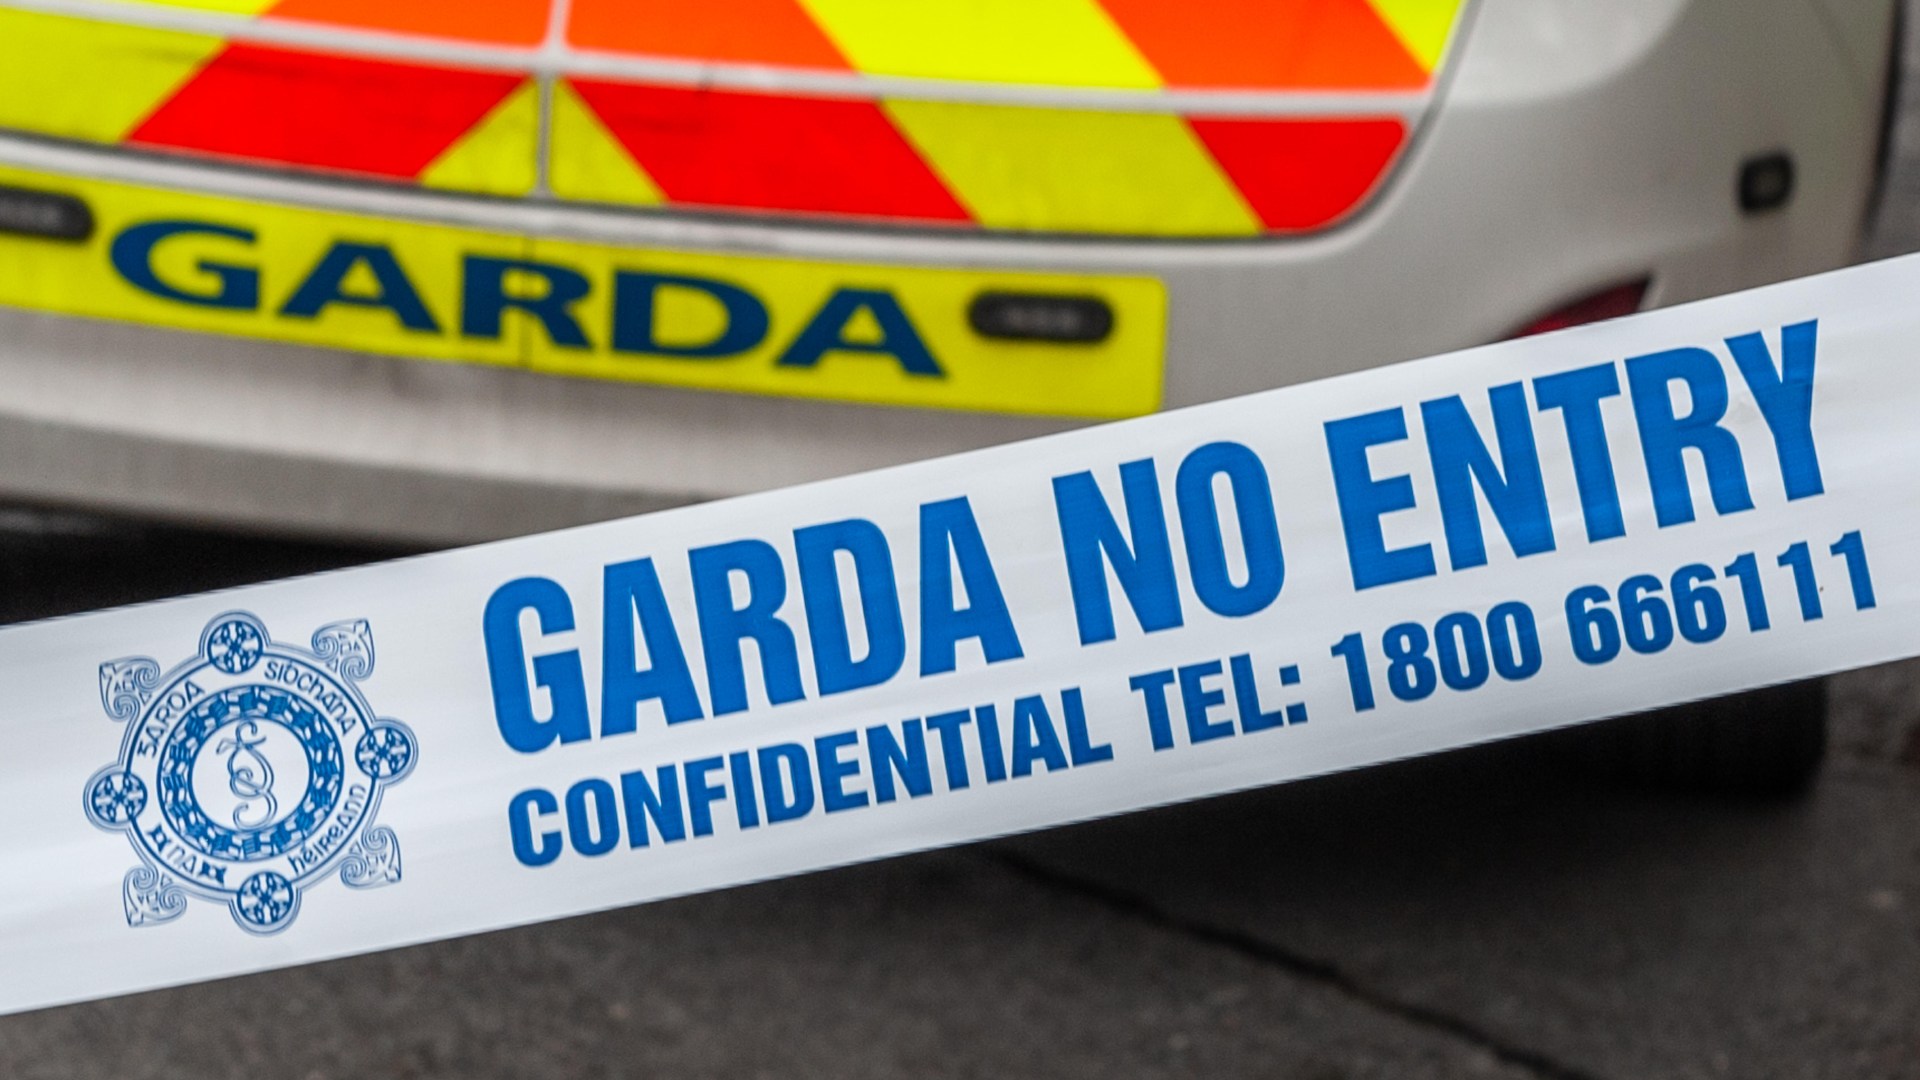 Cyclist, 50s, rushed to hospital with serious injuries after horror smash with car in Westmeath as witness appeal made [Video]